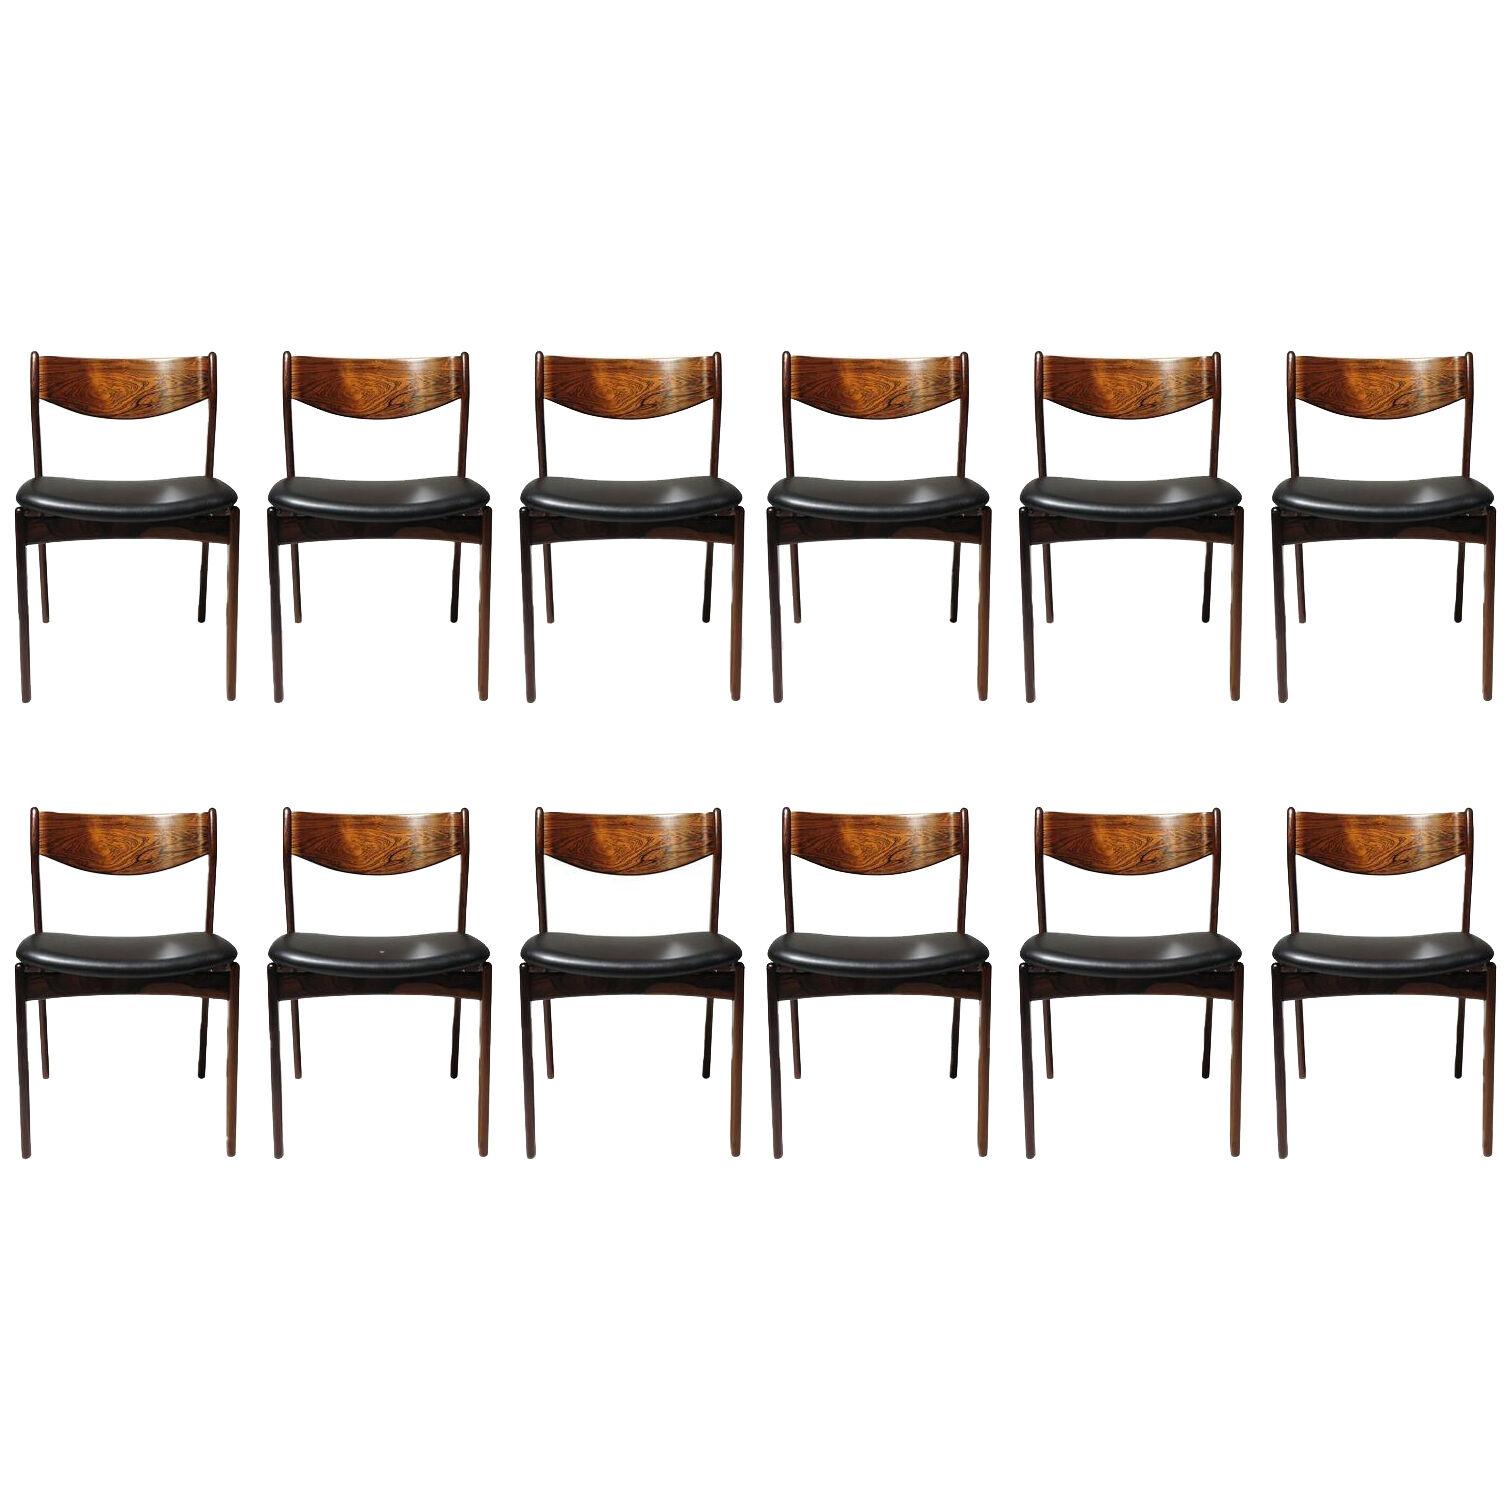 12 Brazilian Rosewood PE Jorgensen Dining Chairs in New Black Leather